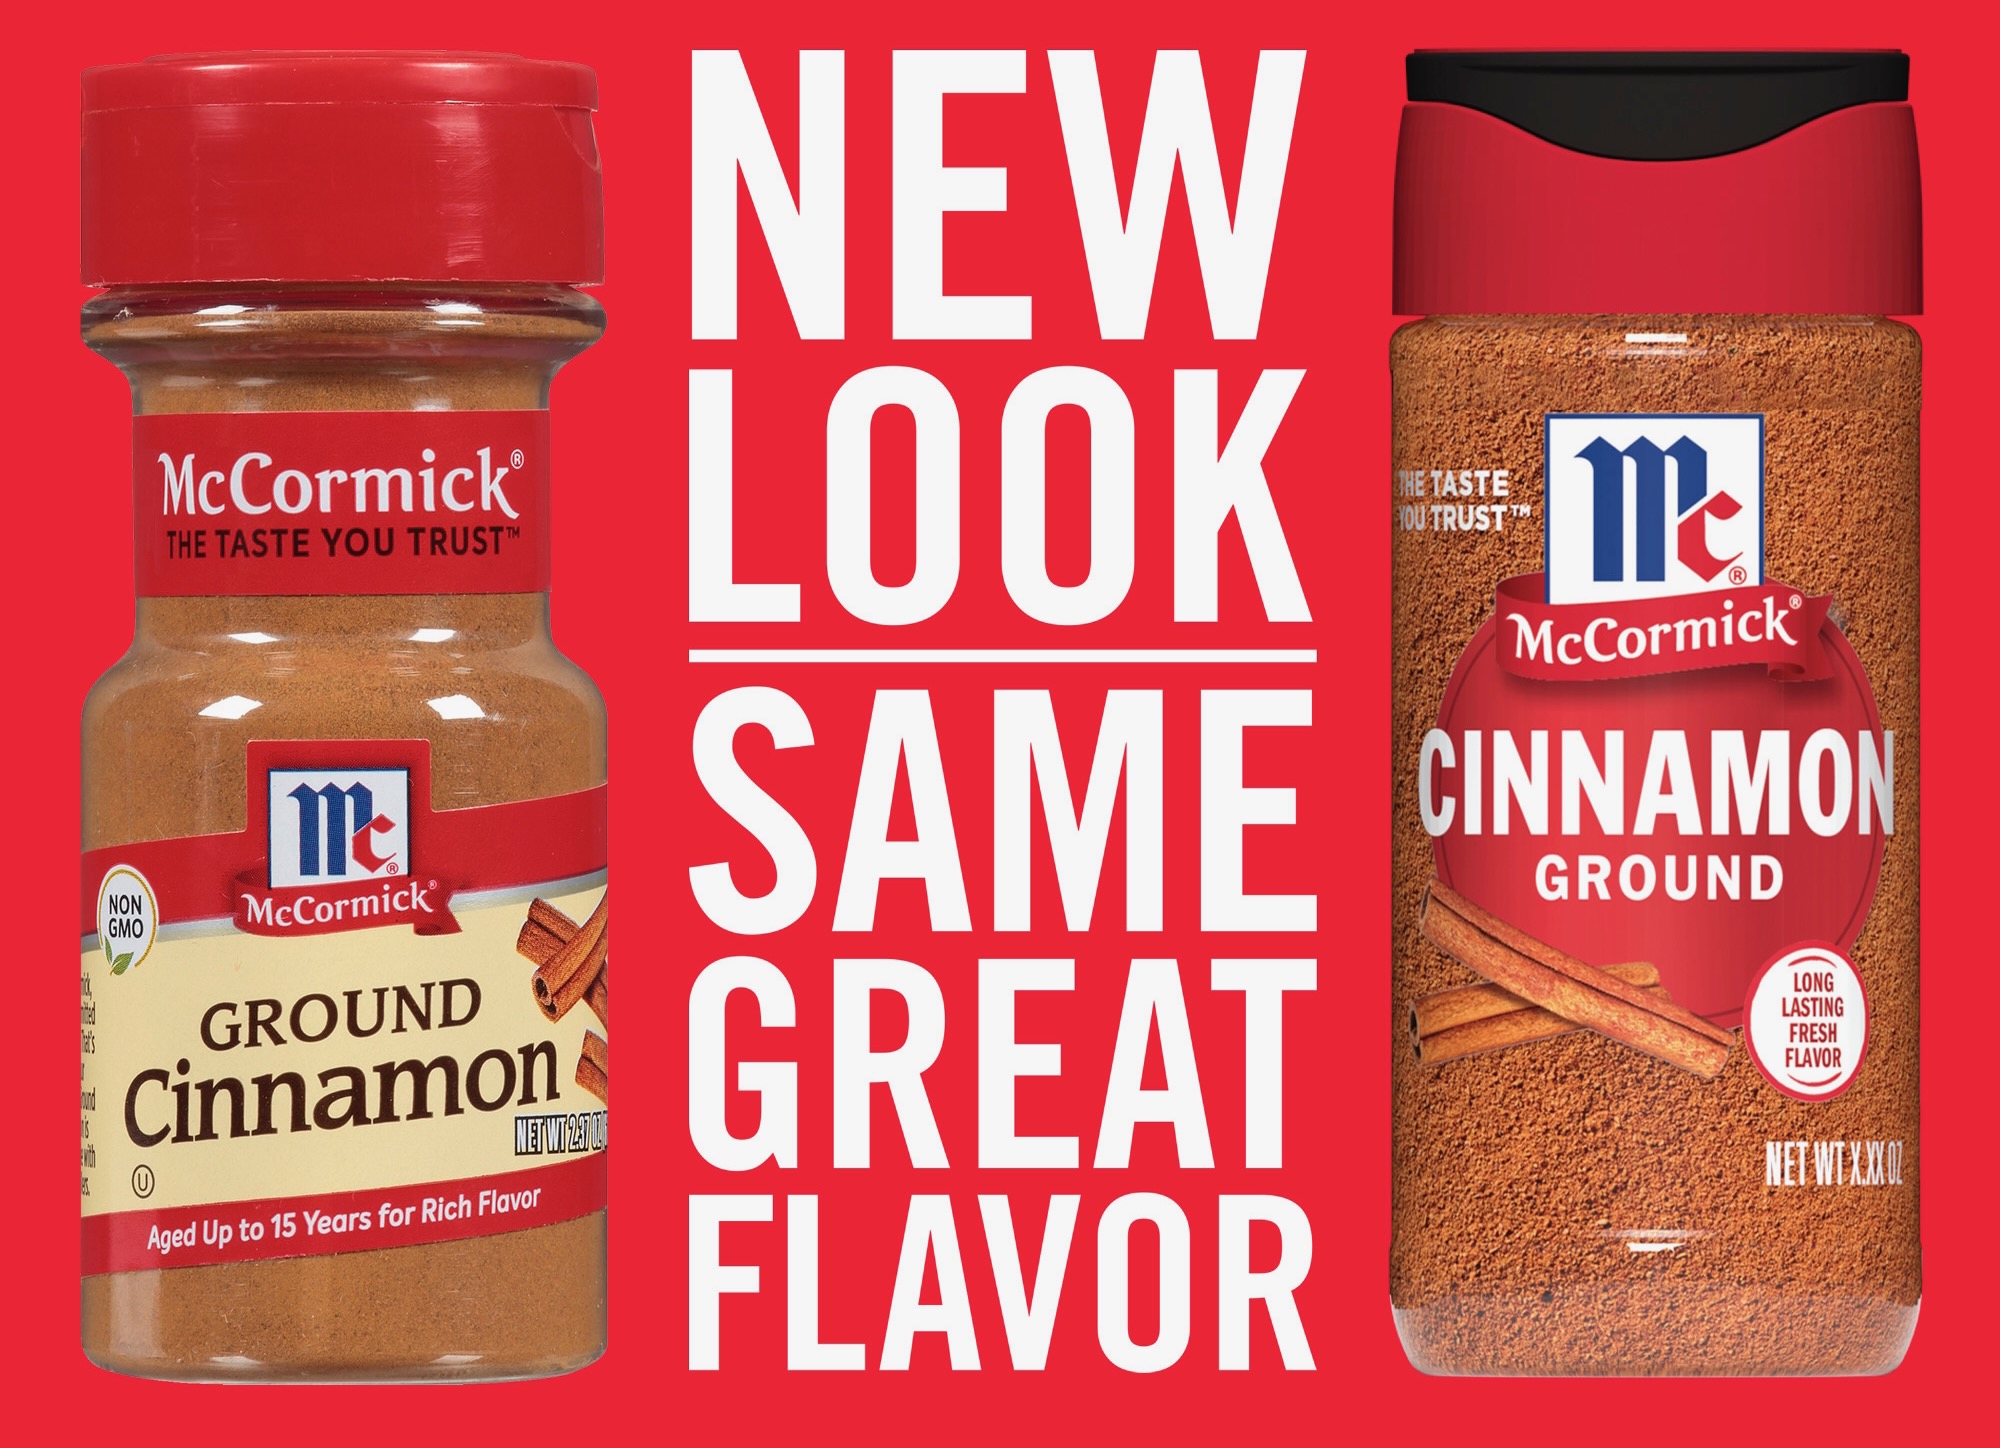 Say good-bye to the old cap on McCormick spice bottles